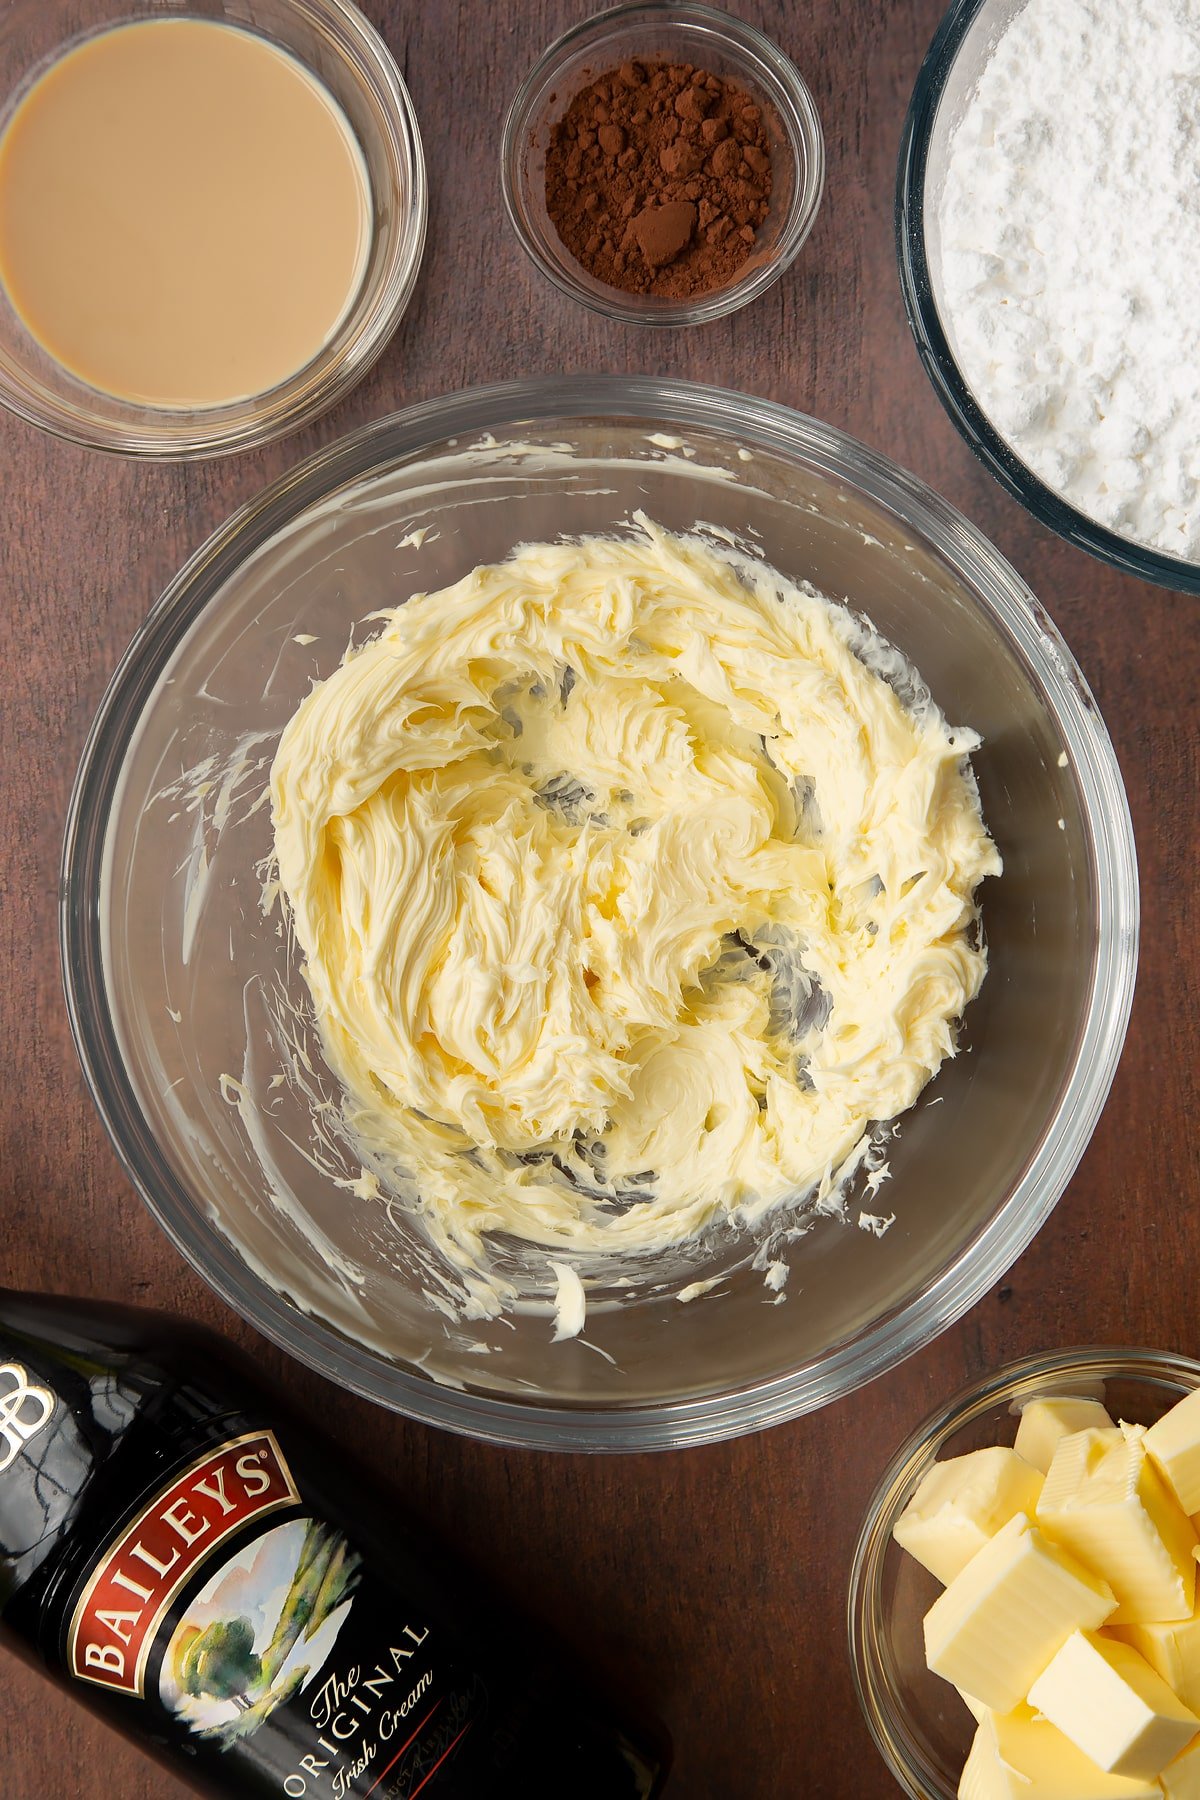 Whipped butter in a glass bowl. Ingredients to make Baileys icing surround the bowl.